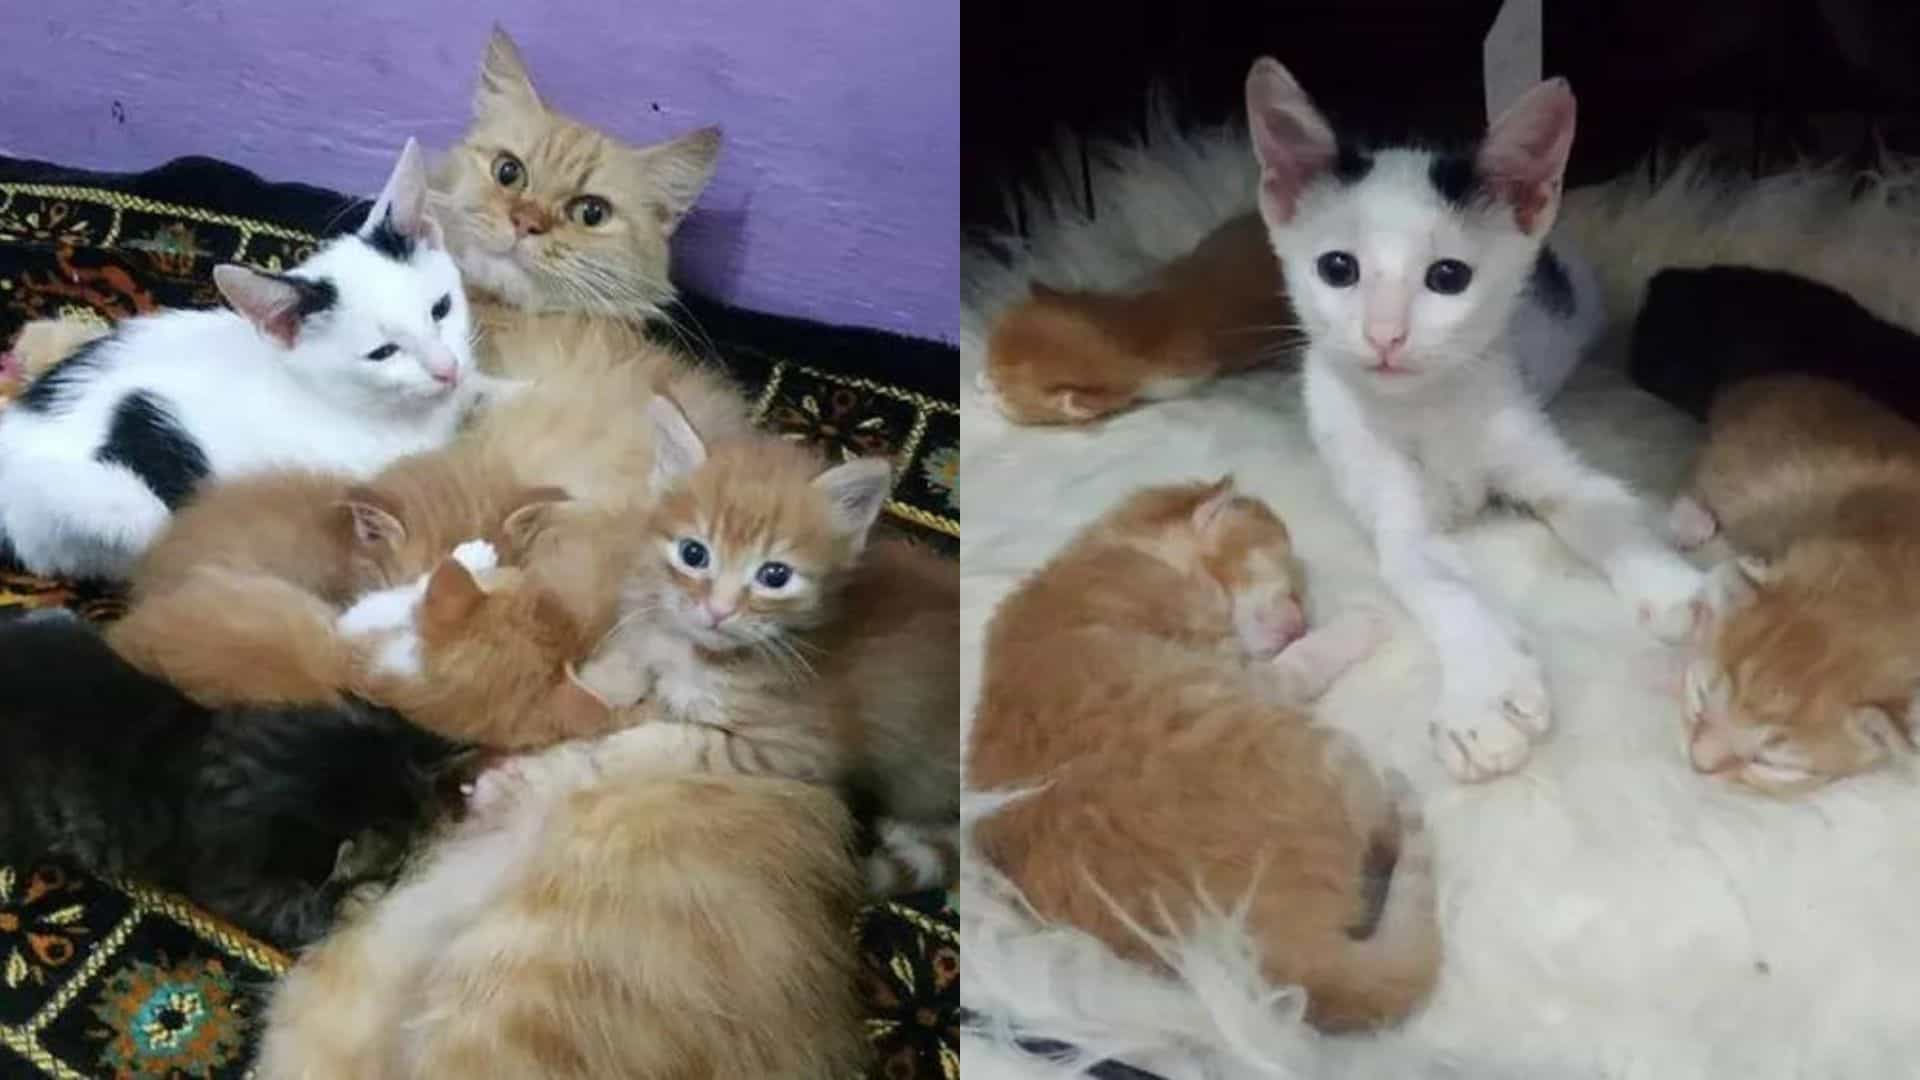 Orphan Kitten Sneaks Into Bed With Small Kittens